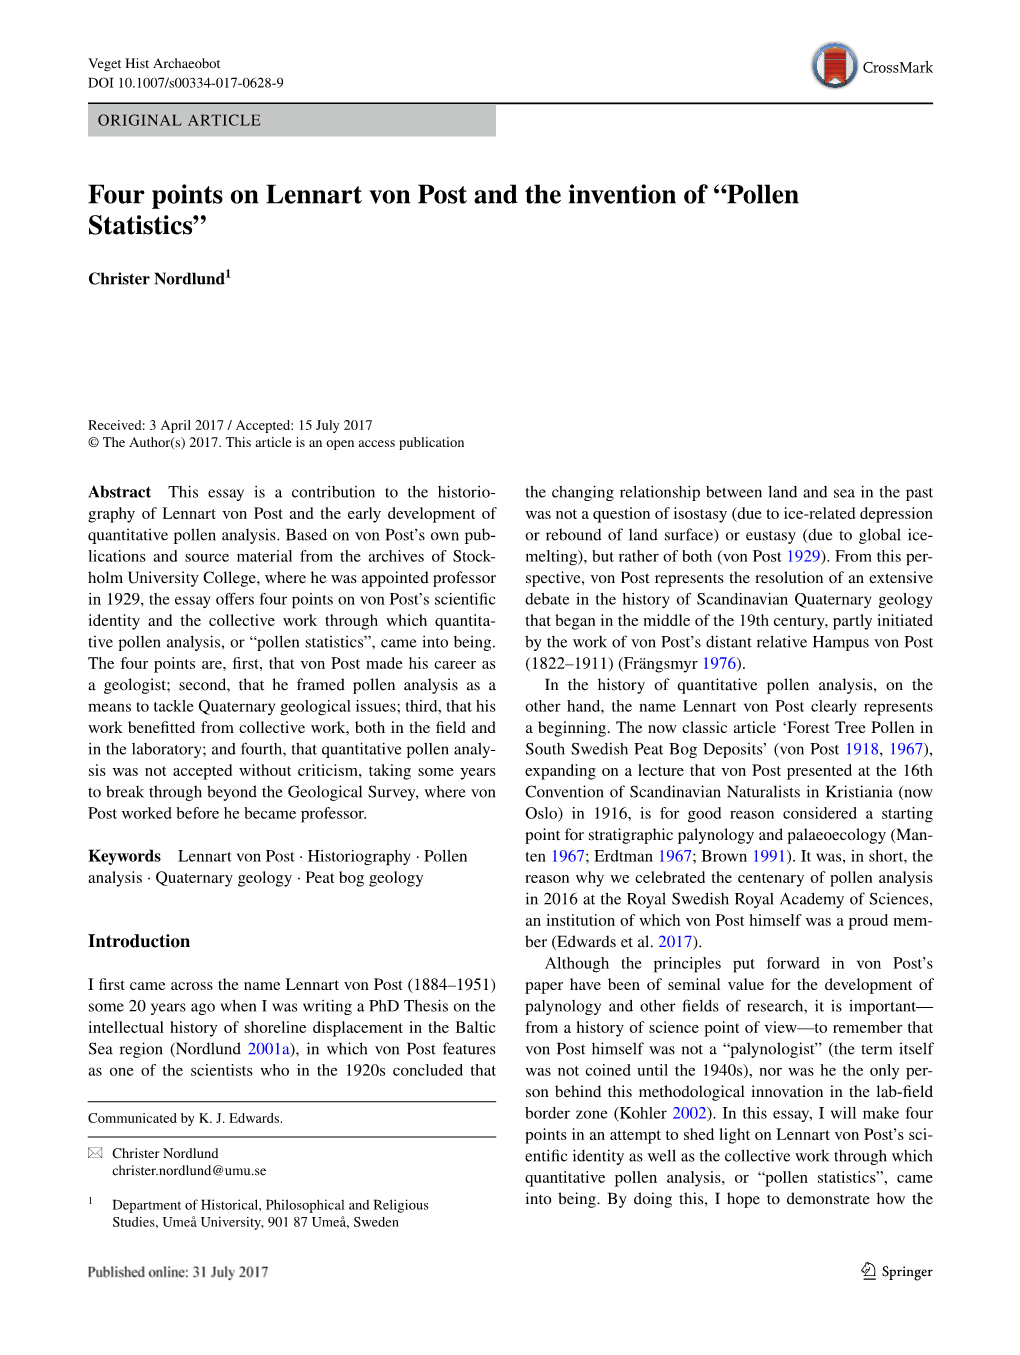 Four Points on Lennart Von Post and the Invention of “Pollen Statistics”